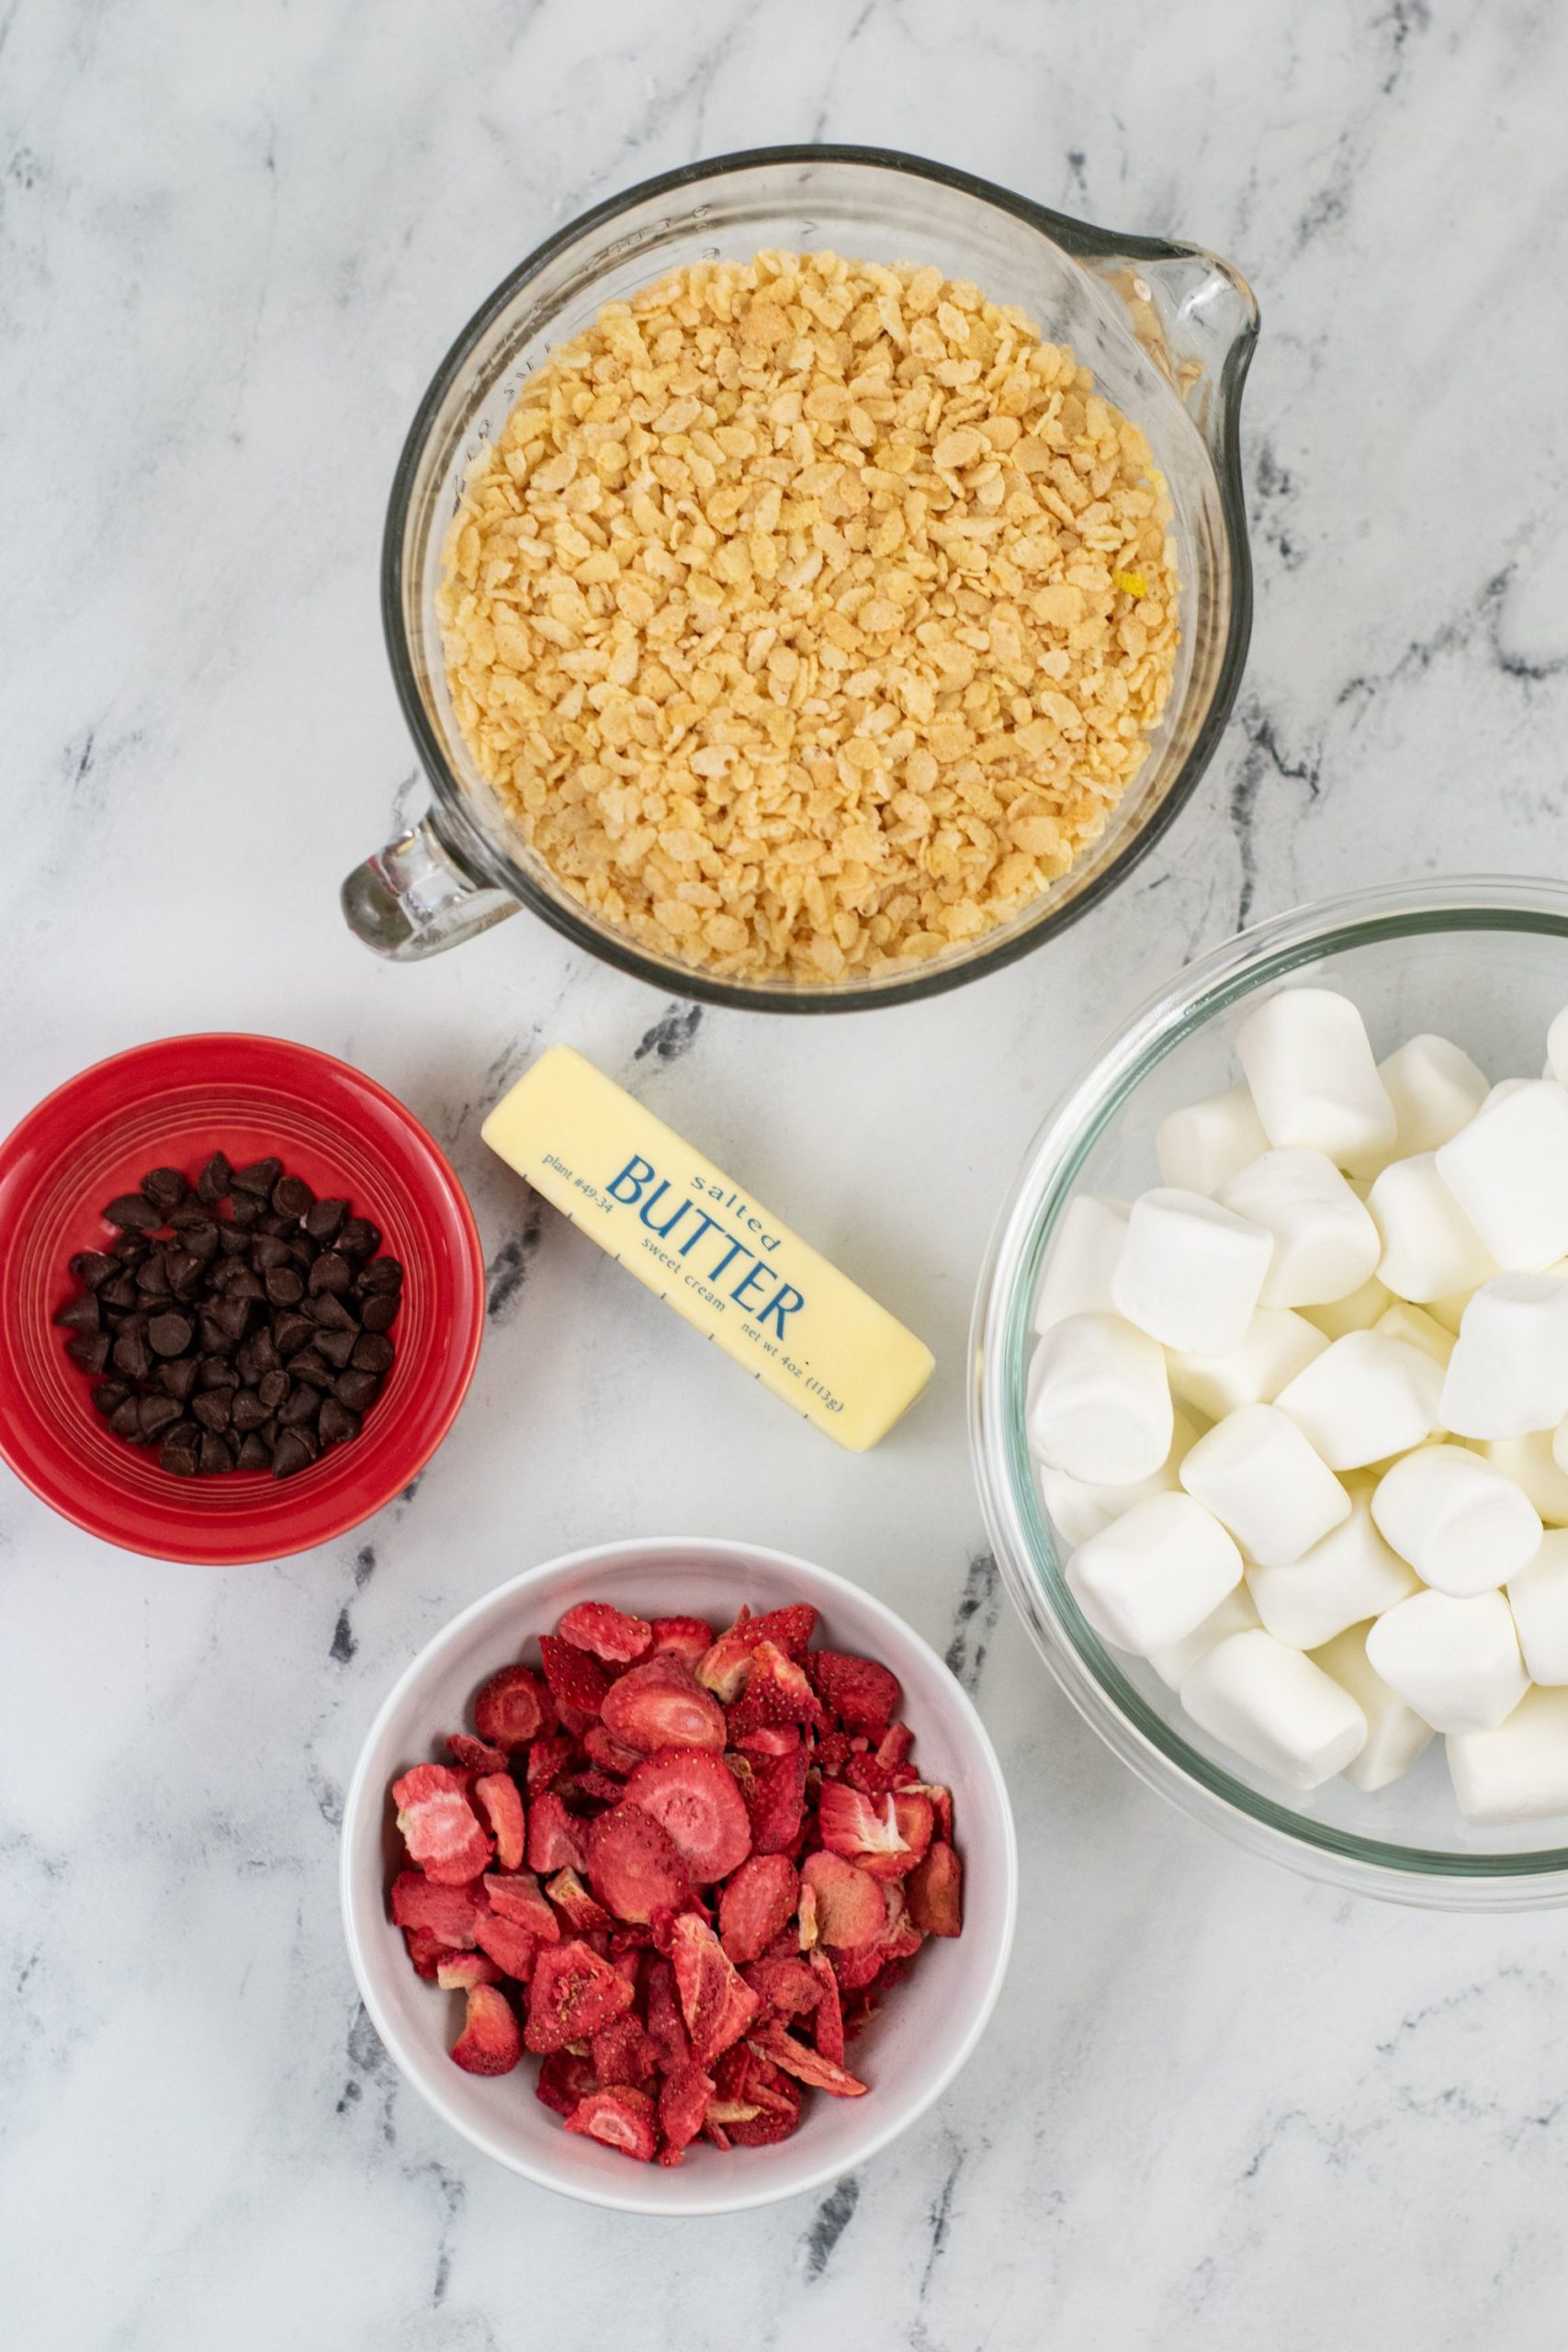 Cereal, freeze dried strawberries, butter, chocolate and marshmallows.